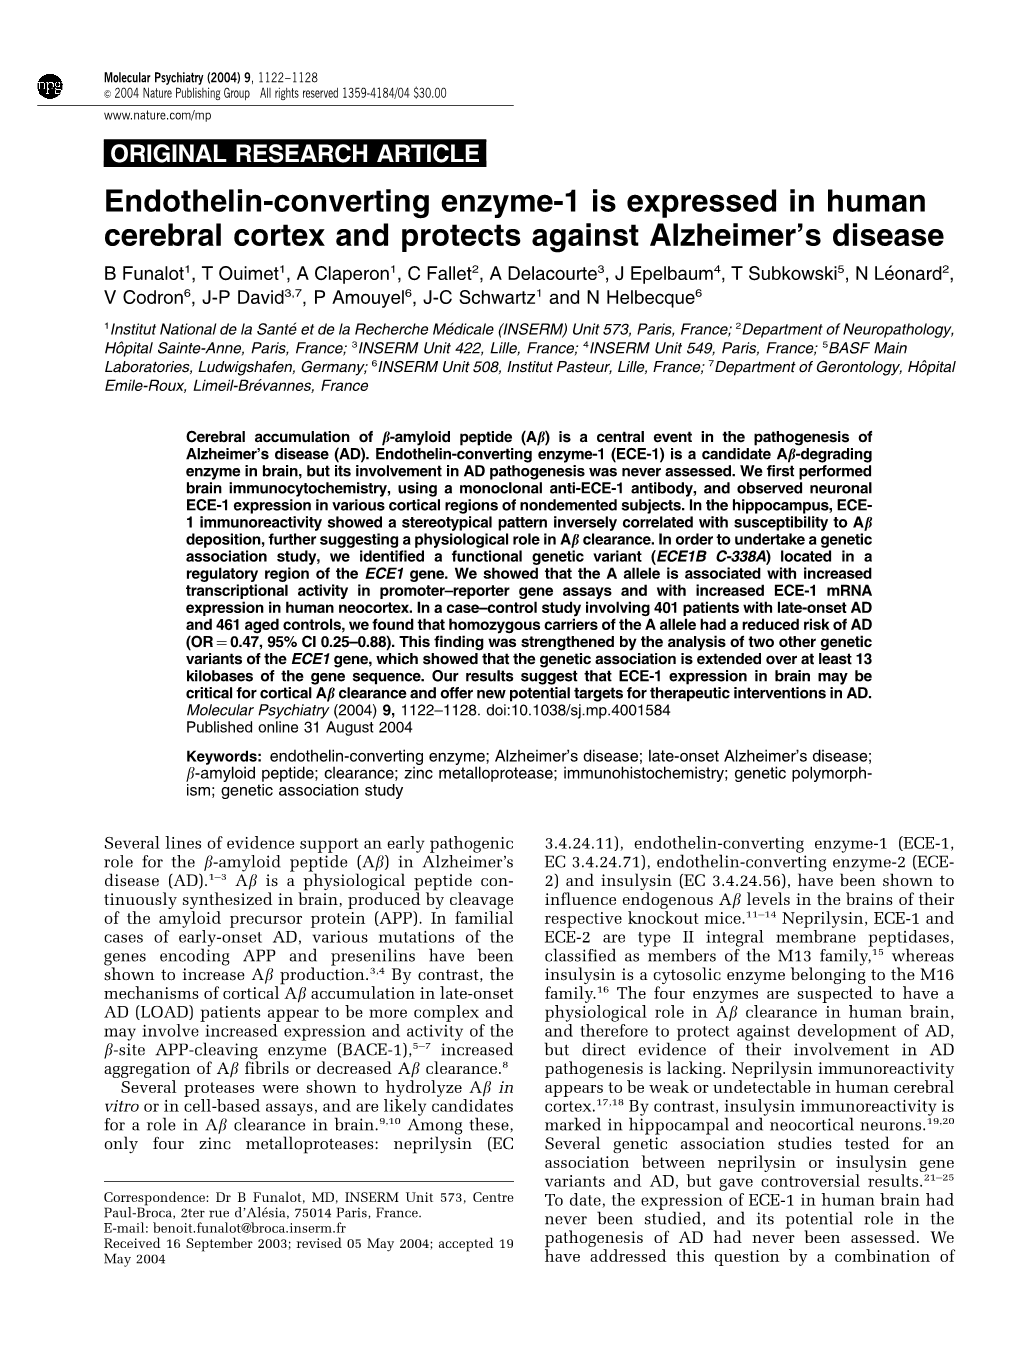 Endothelin-Converting Enzyme-1 Is Expressed in Human Cerebral Cortex and Protects Against Alzheimer's Disease